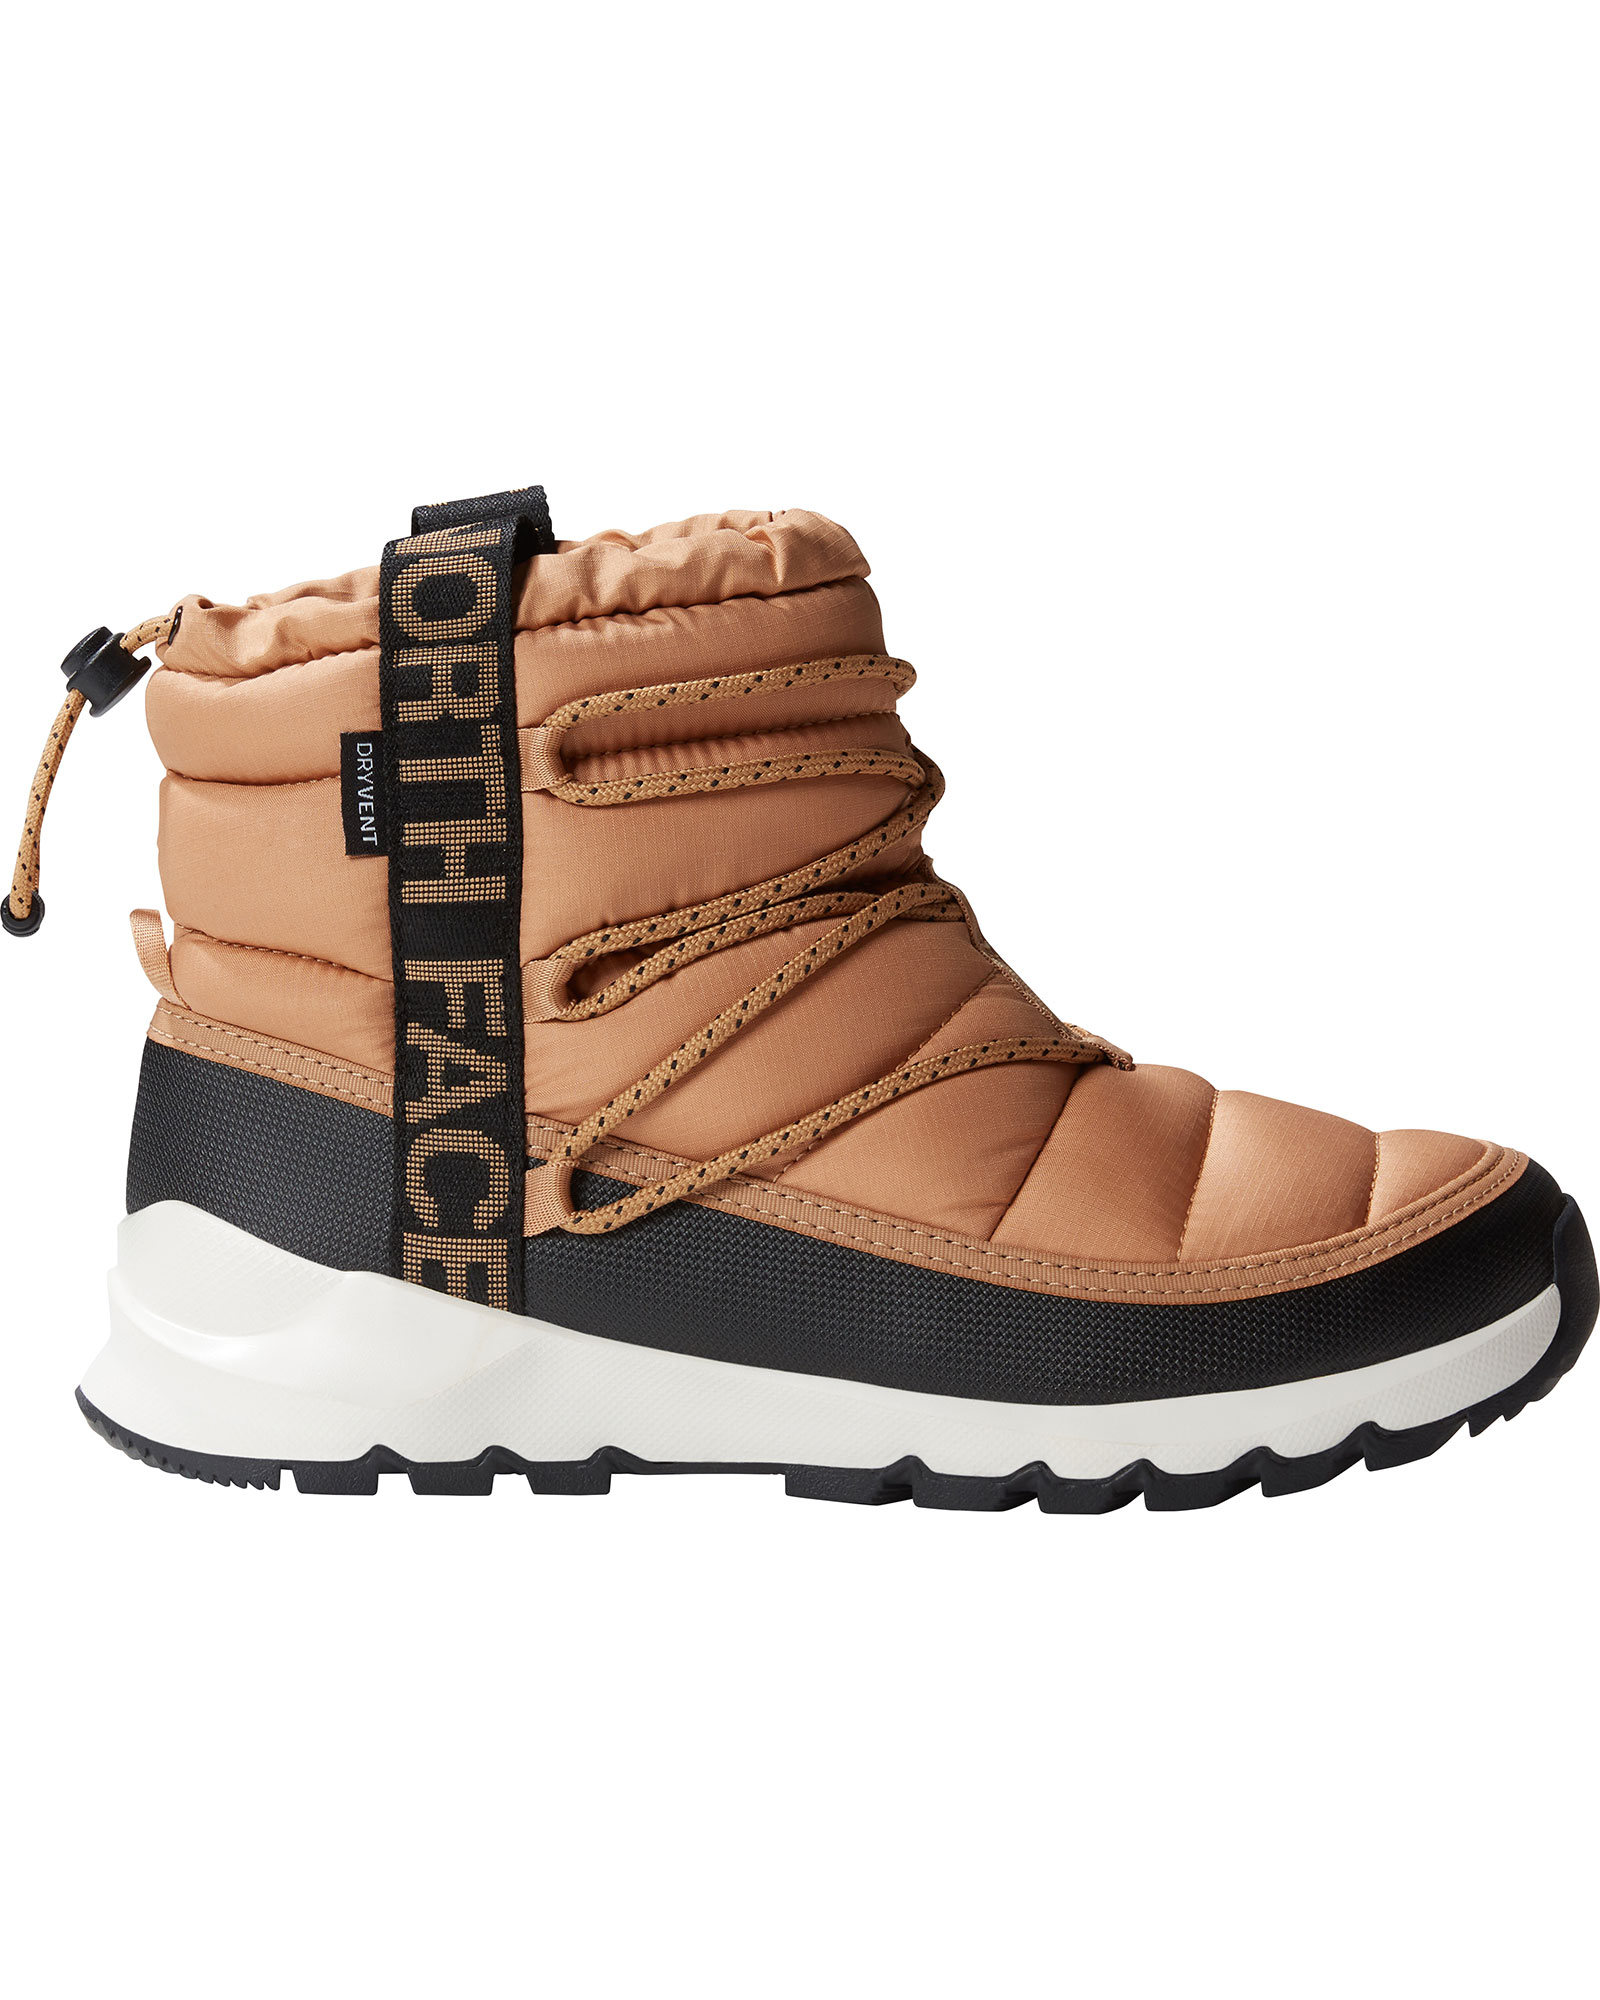 The North Face Women’s ThermoBall Lace Up Waterproof Boots - Almond Butter/TNF Black UK 4